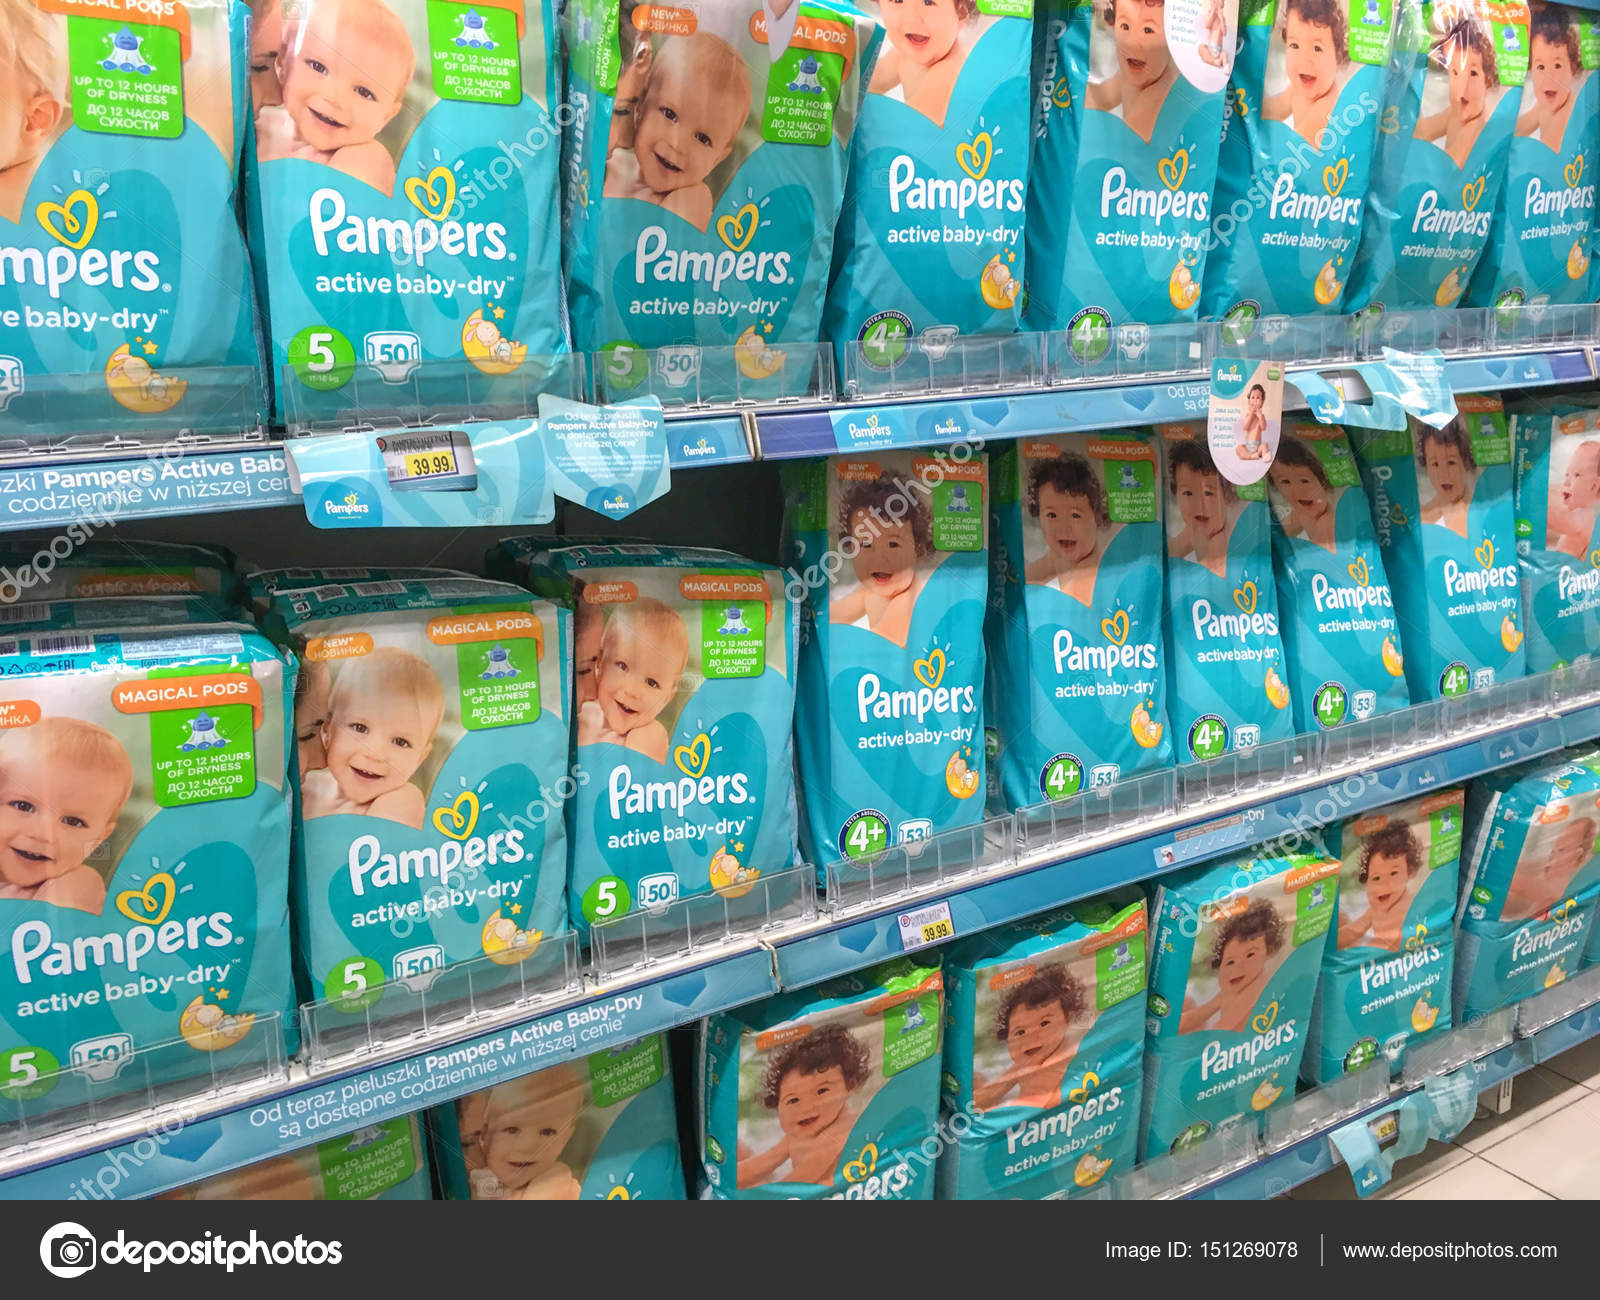 pampers carrefour 2017